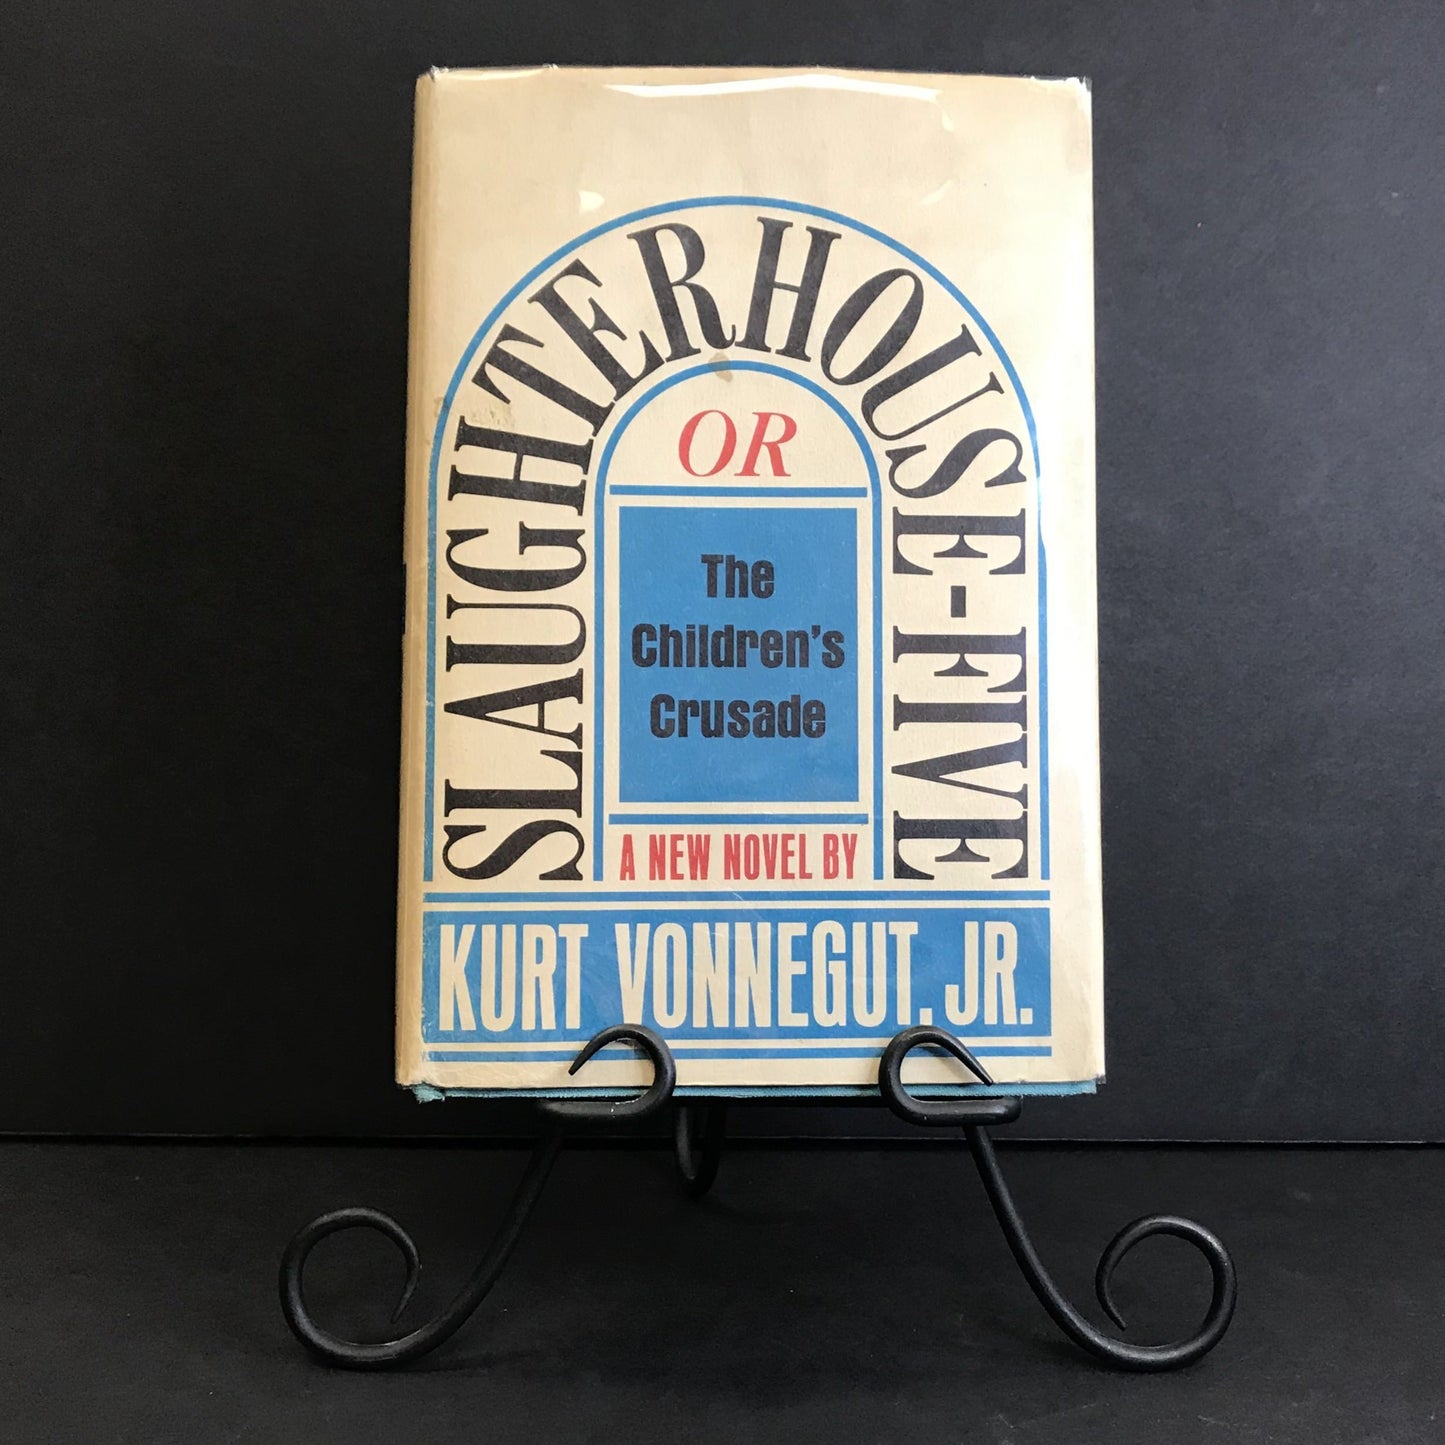 Slaughterhouse Five - Kurt Vonnegut Jr. - Signed - First Edition - Certificate of Authenticity Included - 1969